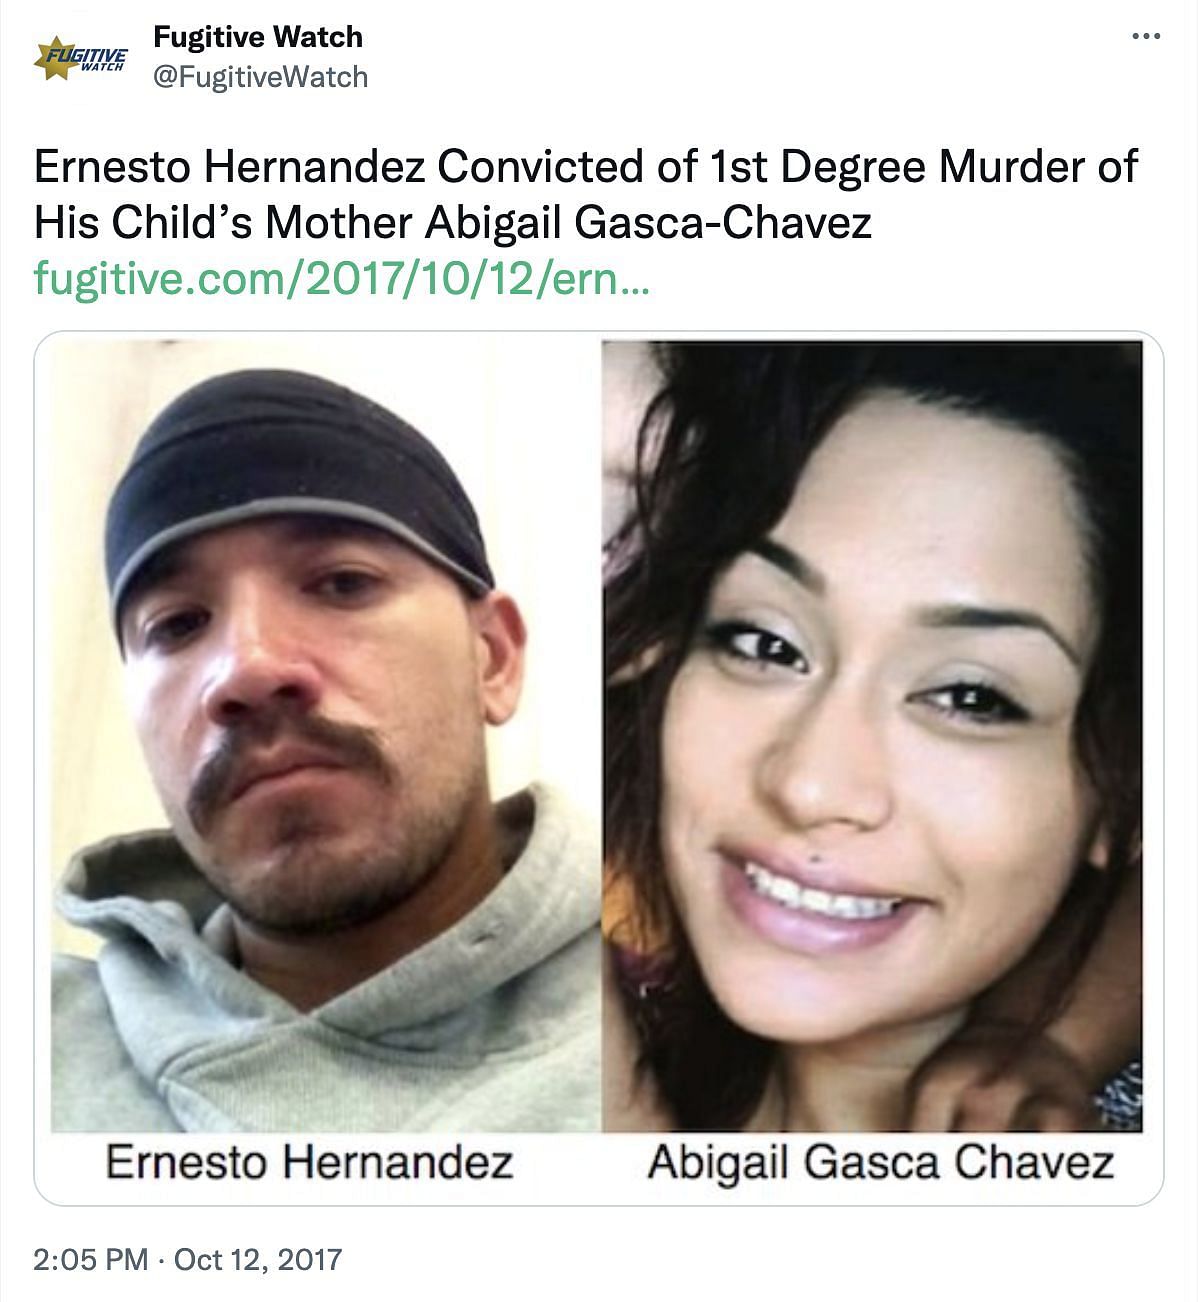 Ernesto Hernandez was convicted and sentenced to life imprisonment (Image via @FugitiveWatch/Twitter)